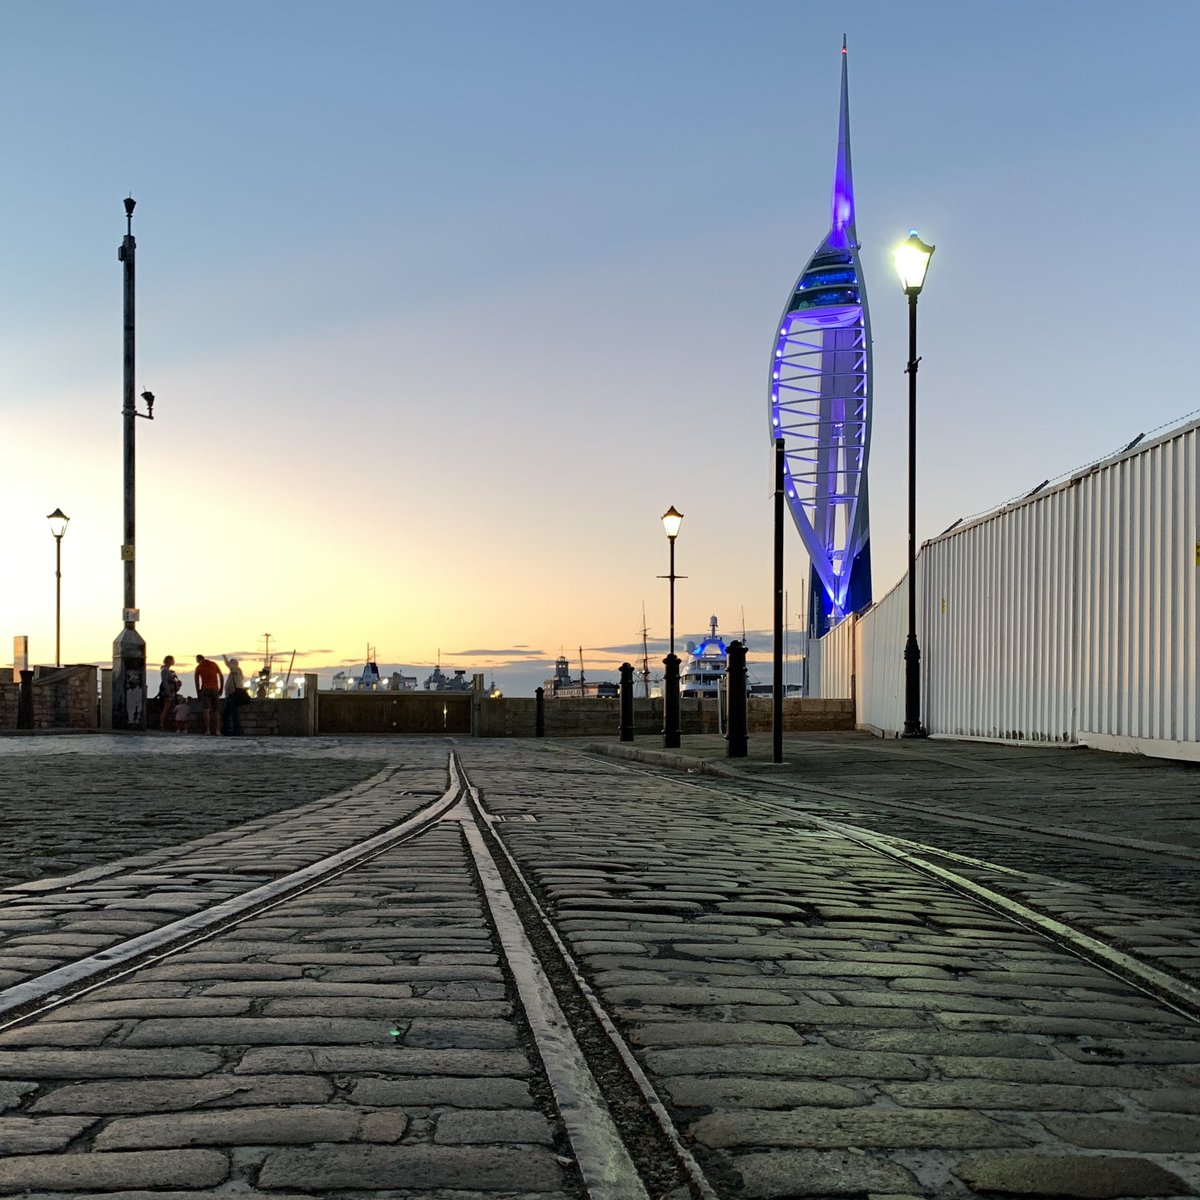 📸 Fun evening out and about in Old Portsmouth 🔘🤳🏽

#sunset #hampshire #shotoniphone #spinnakertower #spiceisland #camberdock #photography